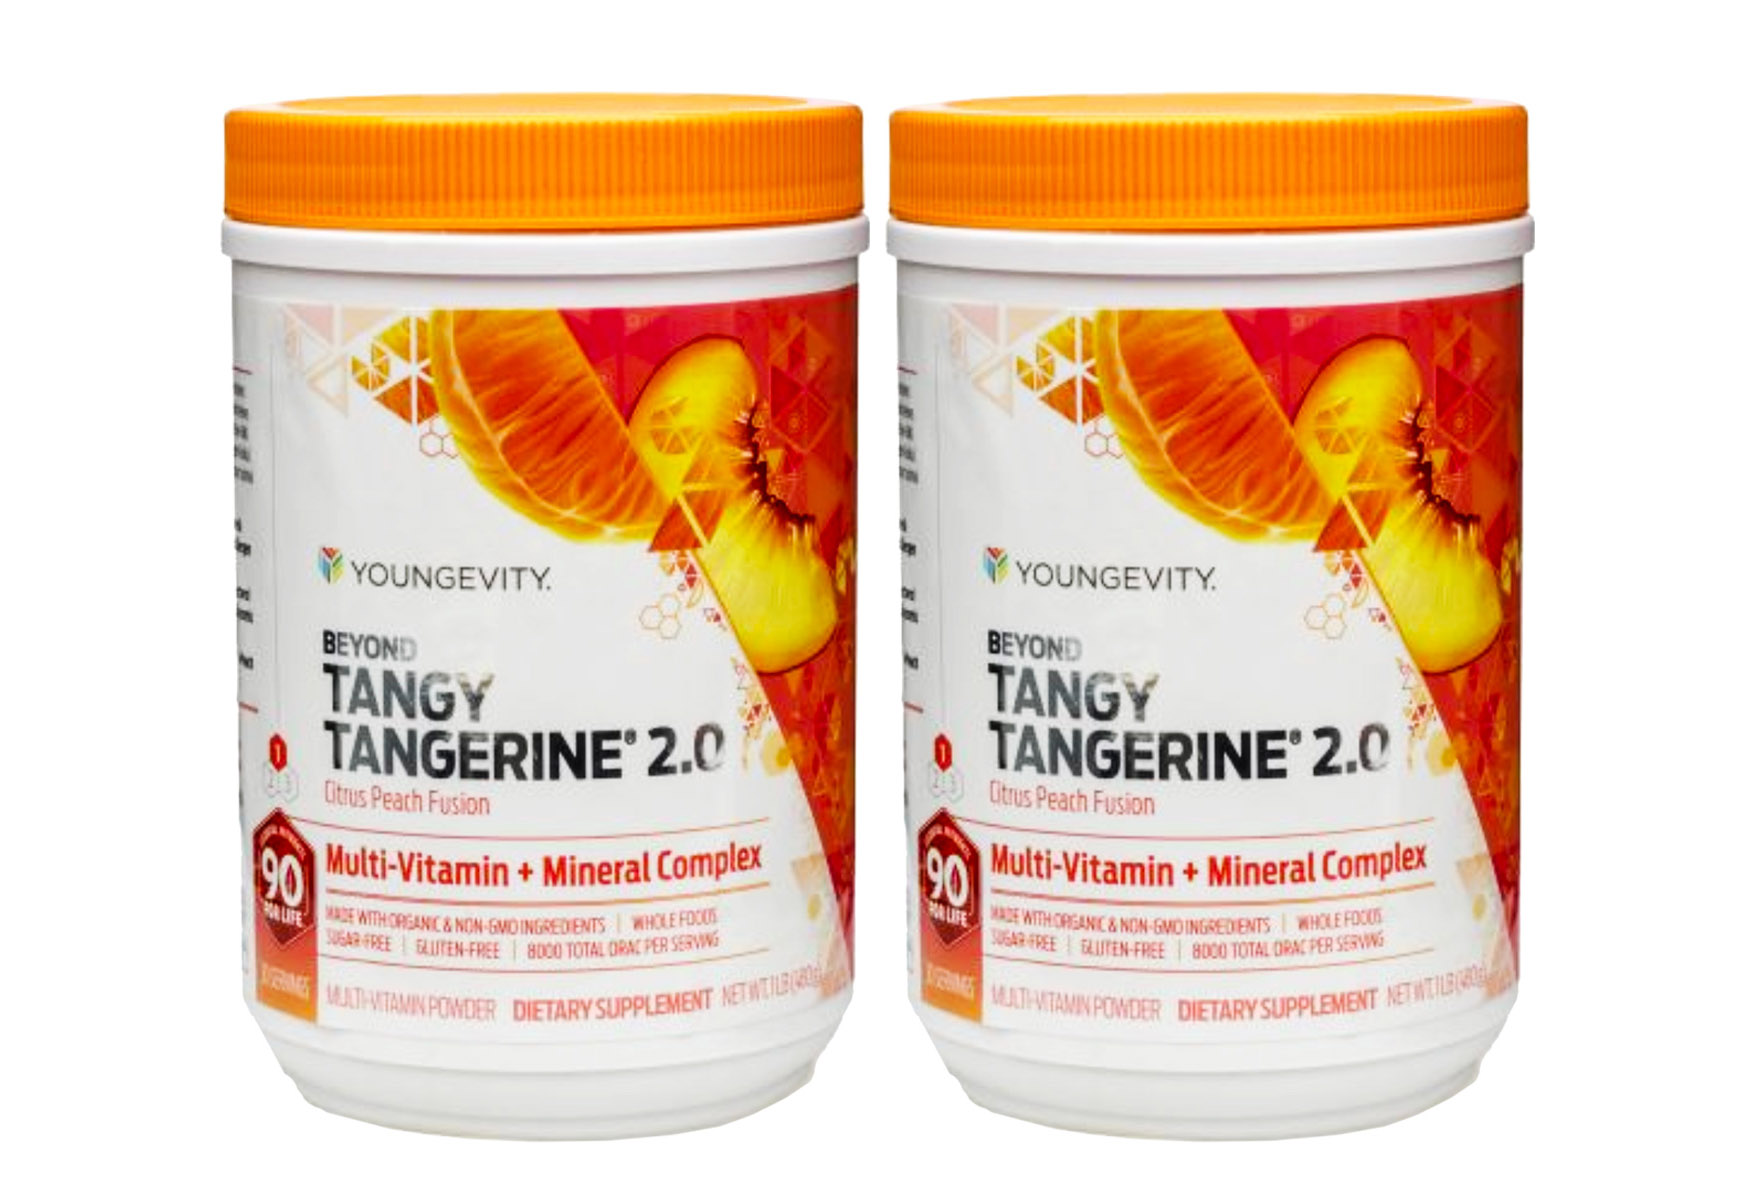 11-beyond-tangy-tangerine-2-0-nutrition-facts